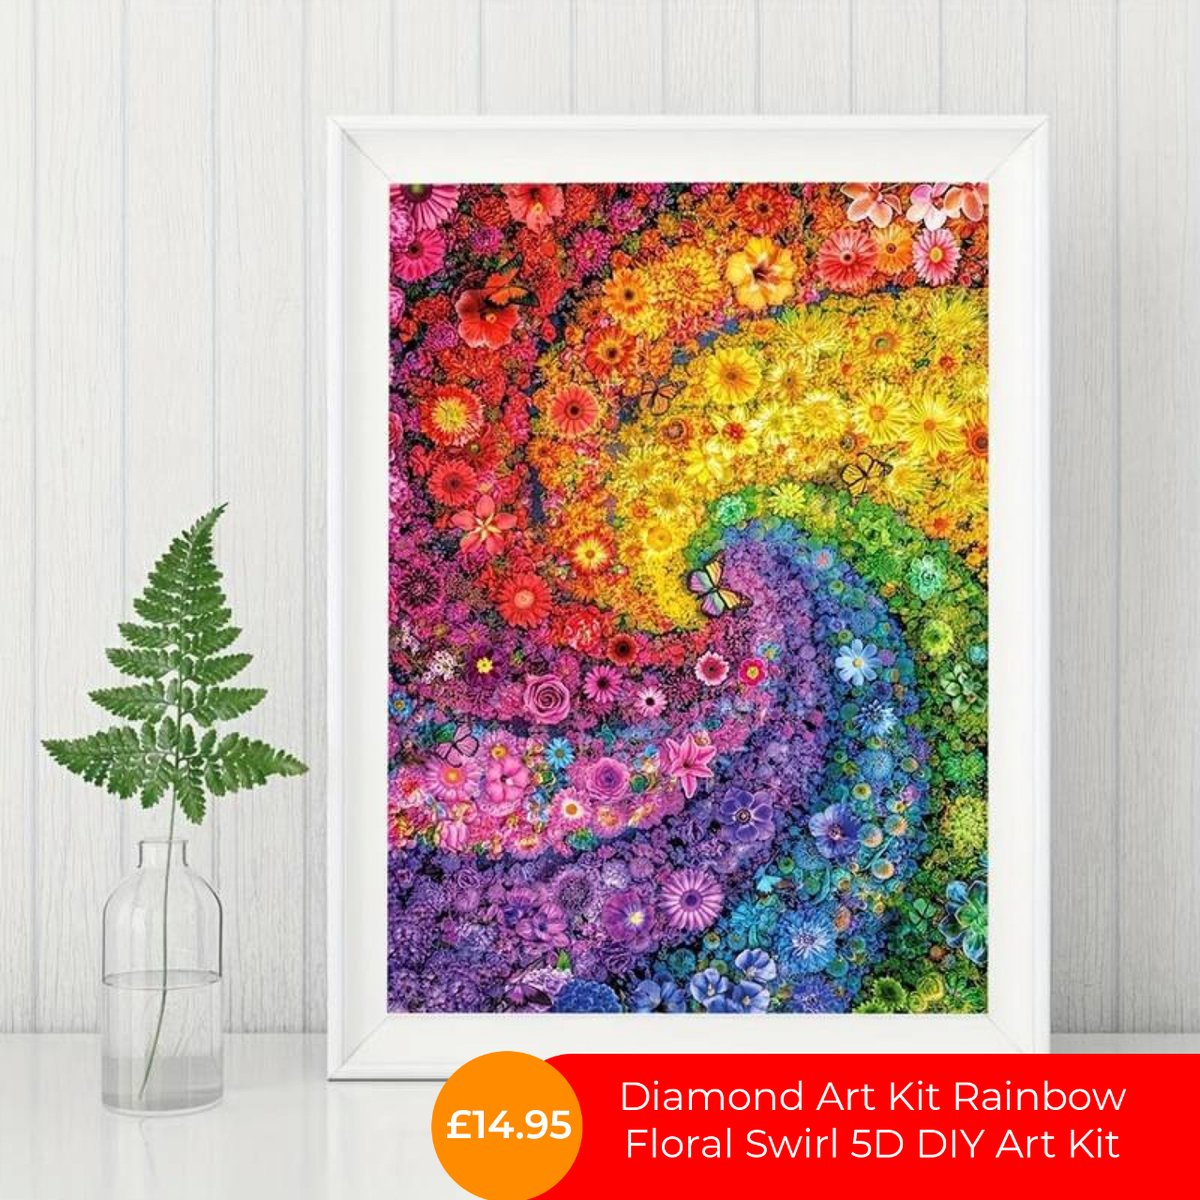 With thousands of products available on Flupio from local creators, why not shop today and buy these wonderful Diamond Art Kits.

#smallbusiness #diamondartkit #marketplace #sellonline #shoplocal #shopsmall #customkeepsakes #art #canvas #DAK